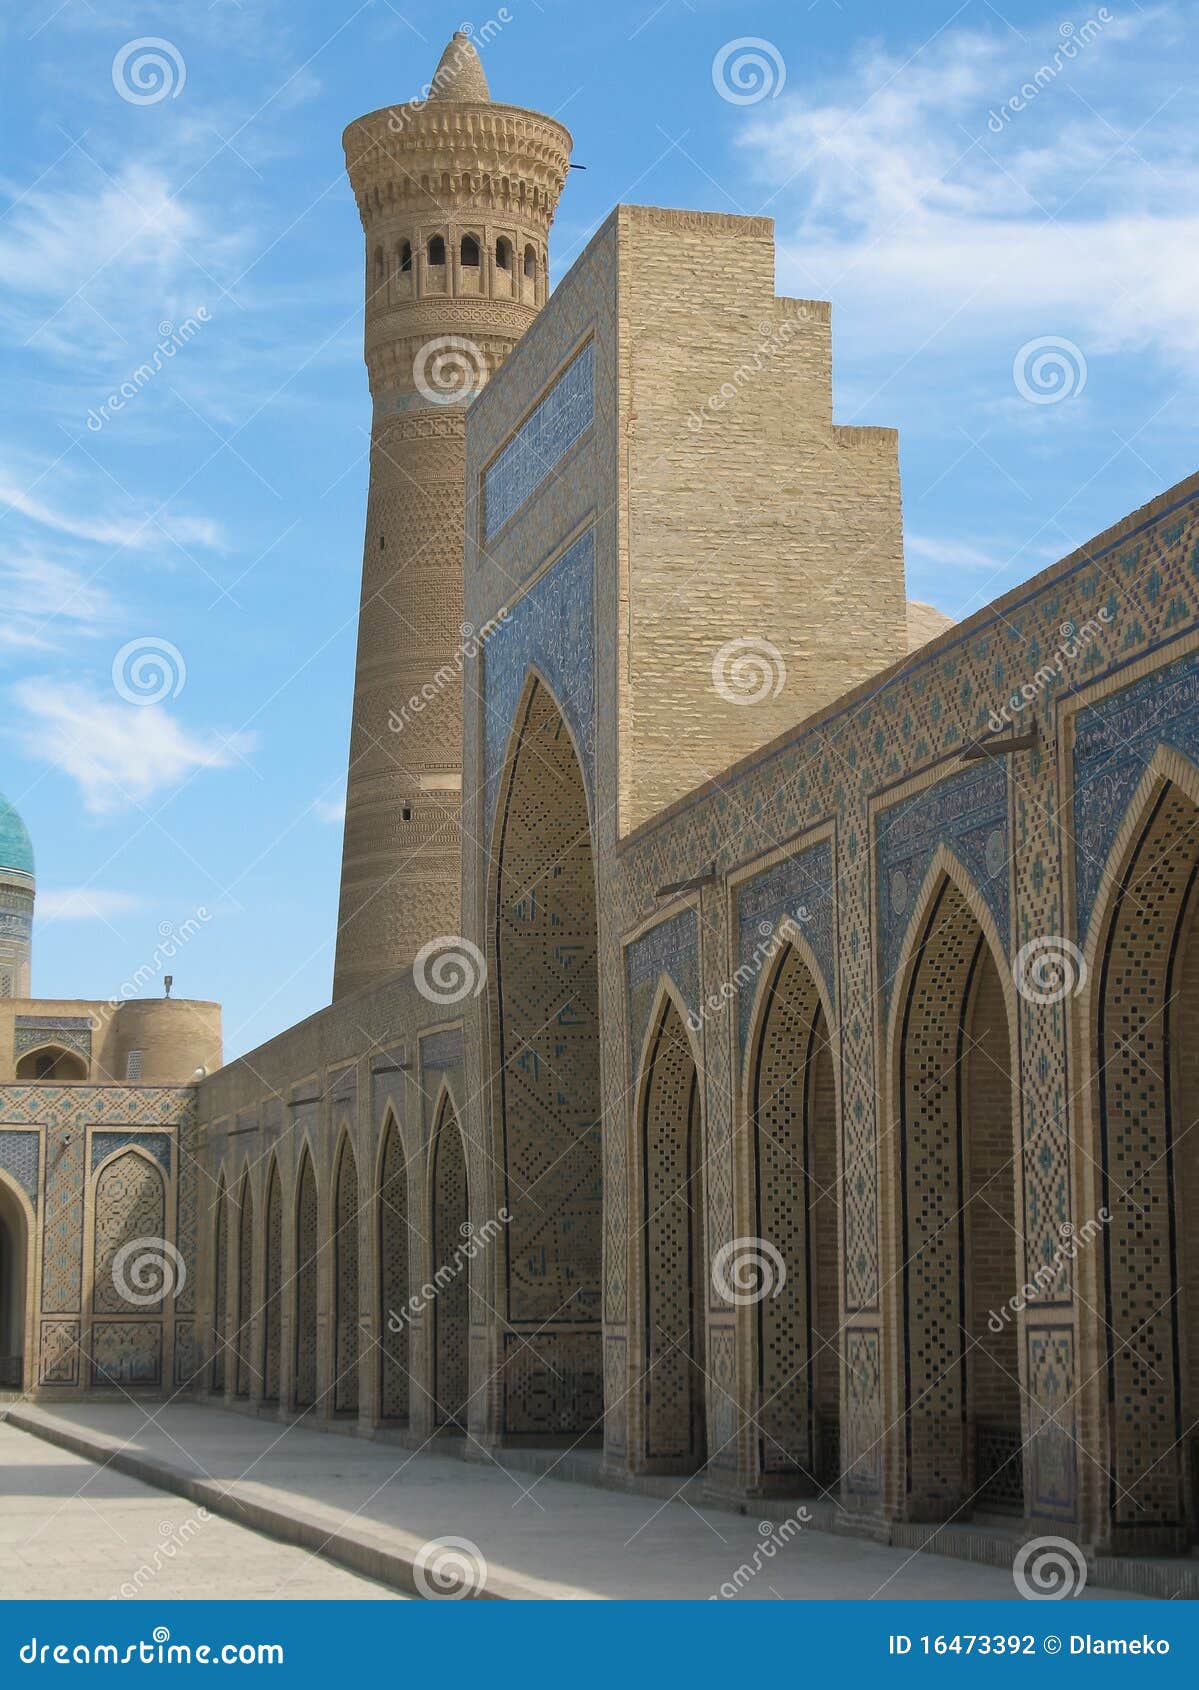 arches and a minaret.